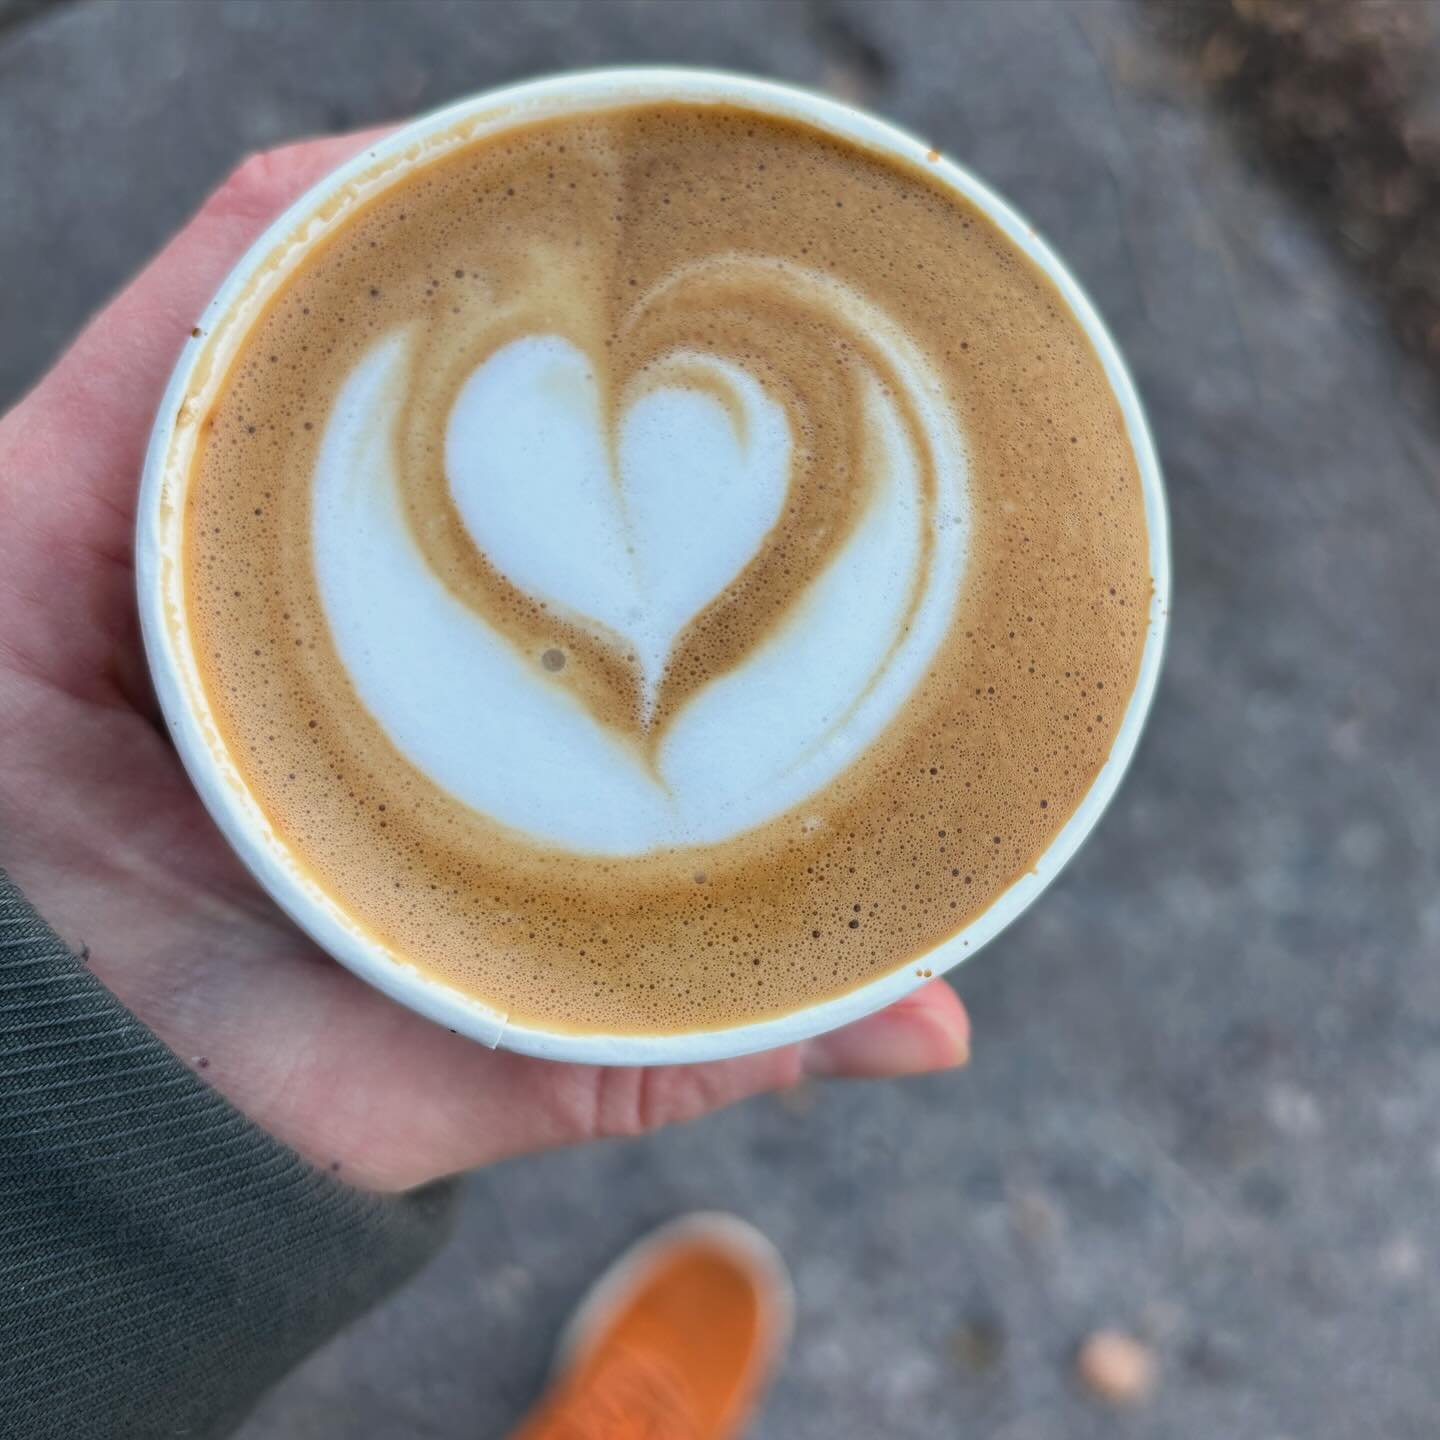 Celebrate the end of 2023 with a warm heart to carry into the year ahead. ☕️🤎 This is the last weekend of our window preview: Thursday and Friday 7am-12, Sunday 8am-12 ((no Saturday hours)). Place your pick up pre-orders online now for beans and gif